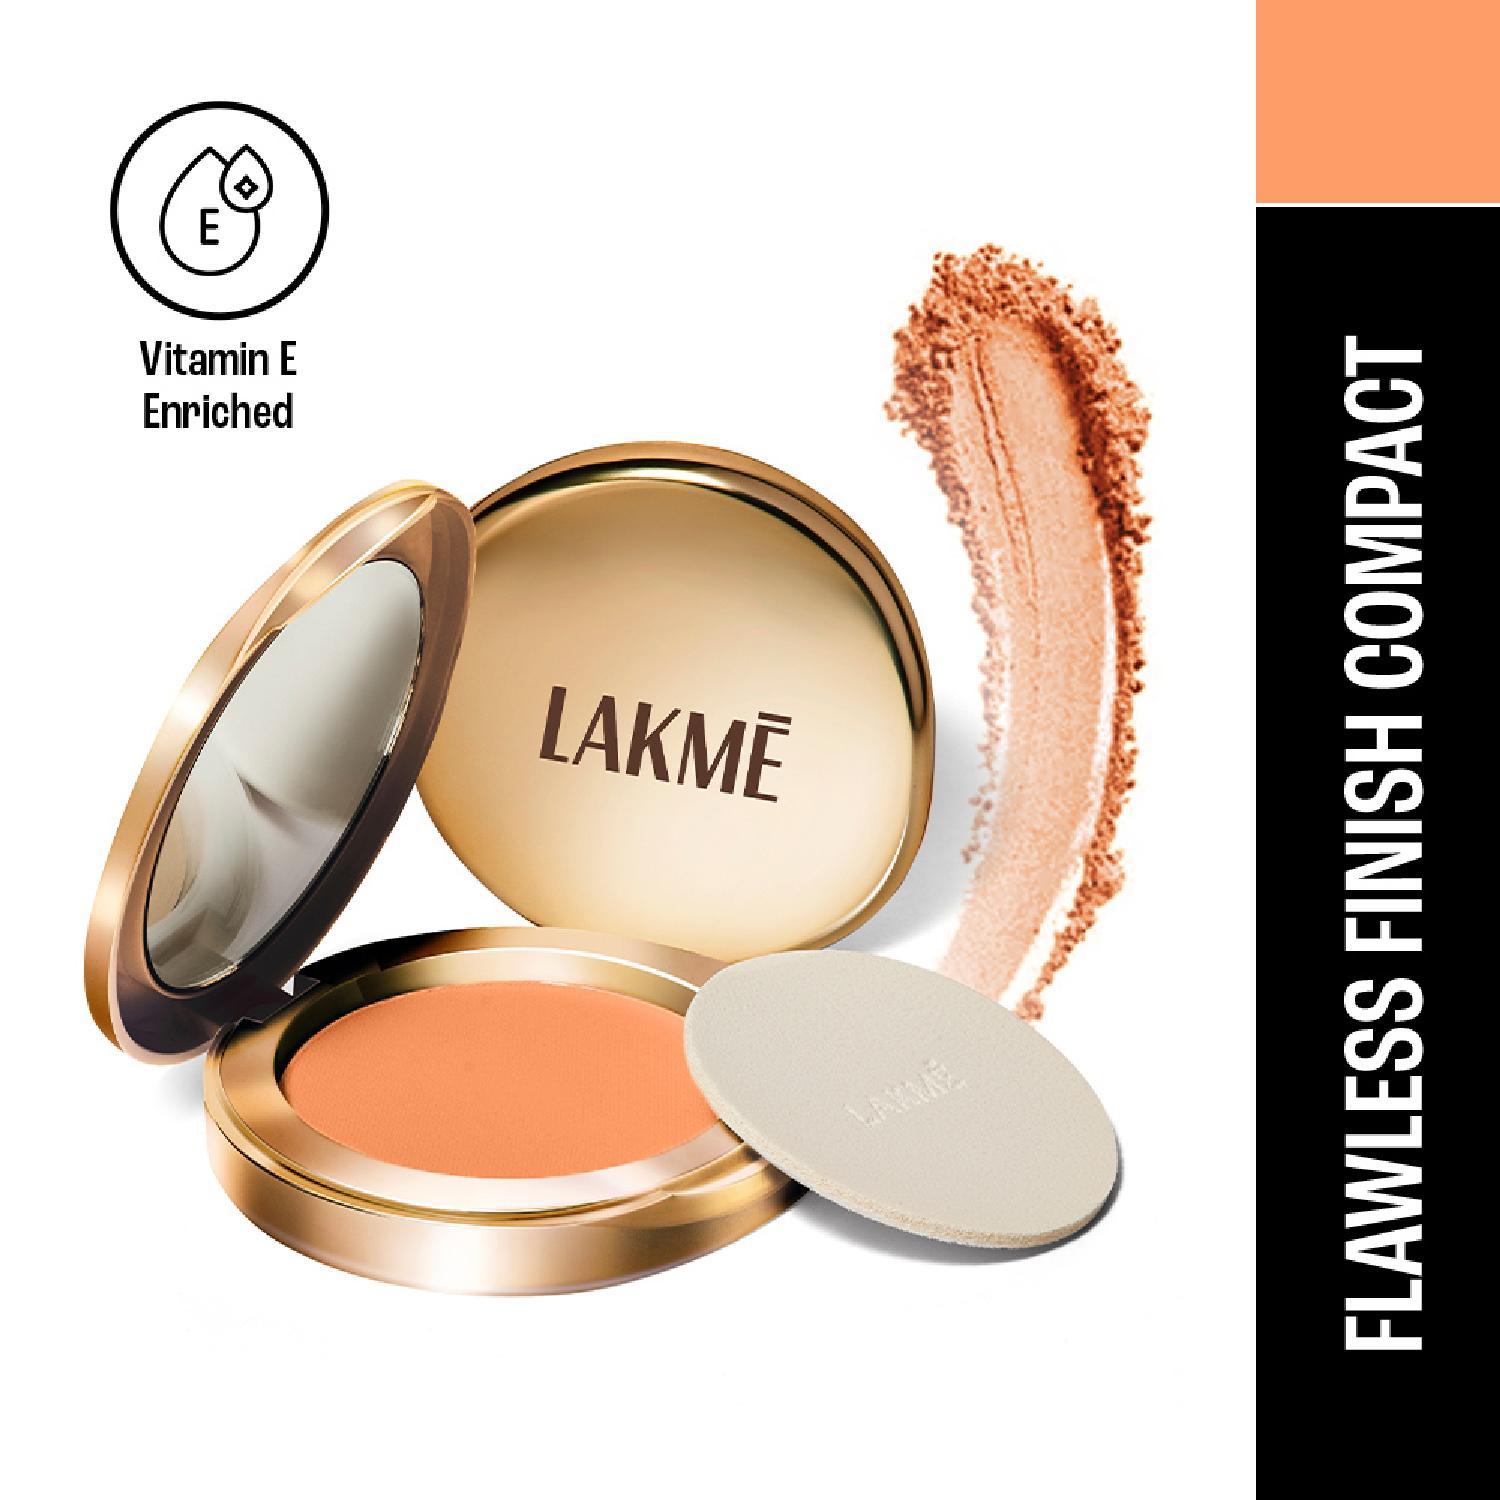 Lakme 9 to 5 Powerplay Matte Compact, Oil Control Formula, With Vitamin E, Apricot (9g)